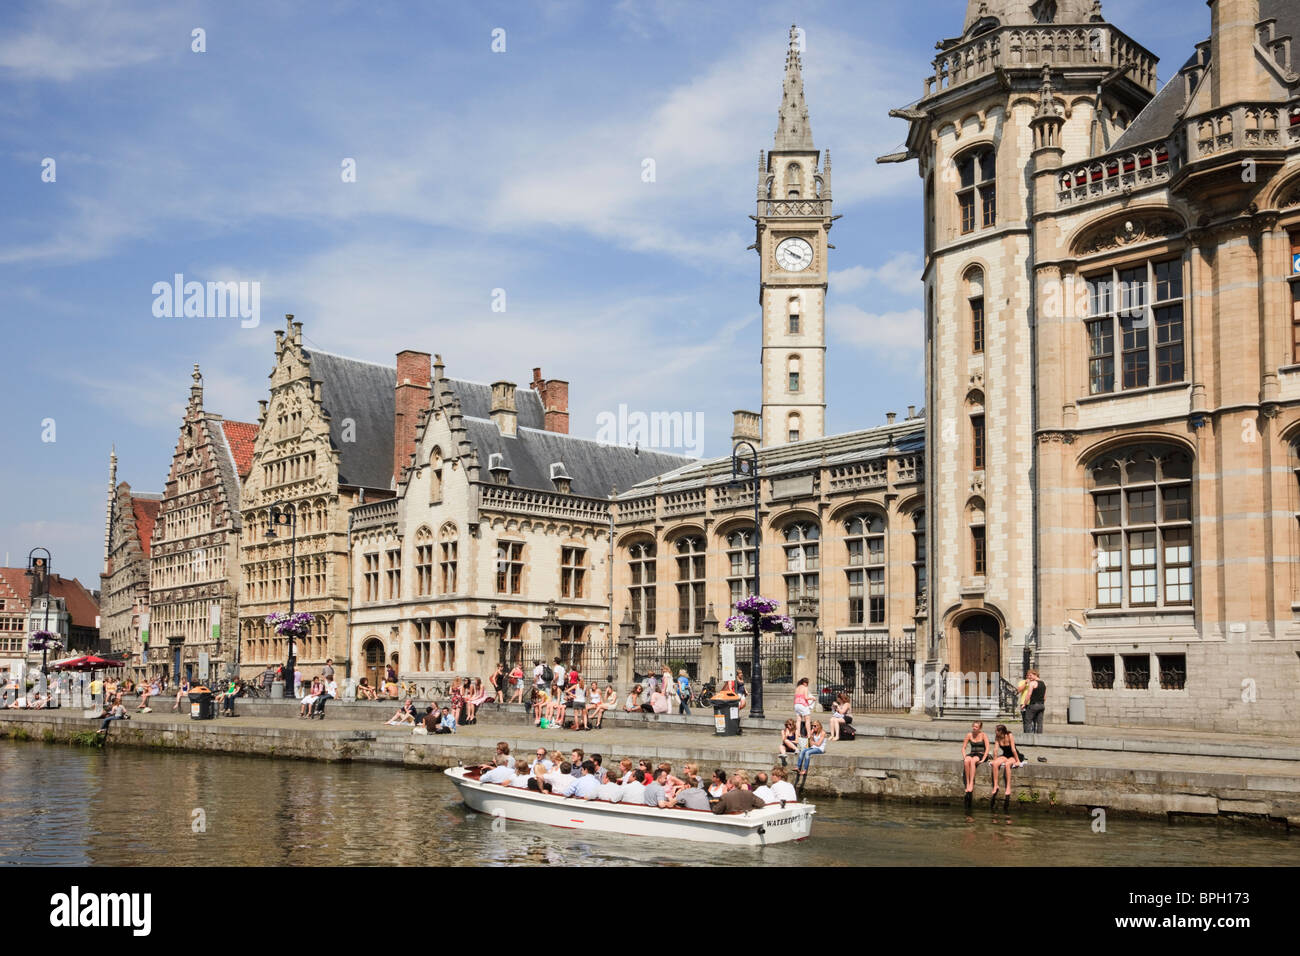 Graslei Site, Ghent, East Flanders, Belgium, Tourists in sightseeing boats on River Leie with medieval Flemish Guild houses Stock Photo